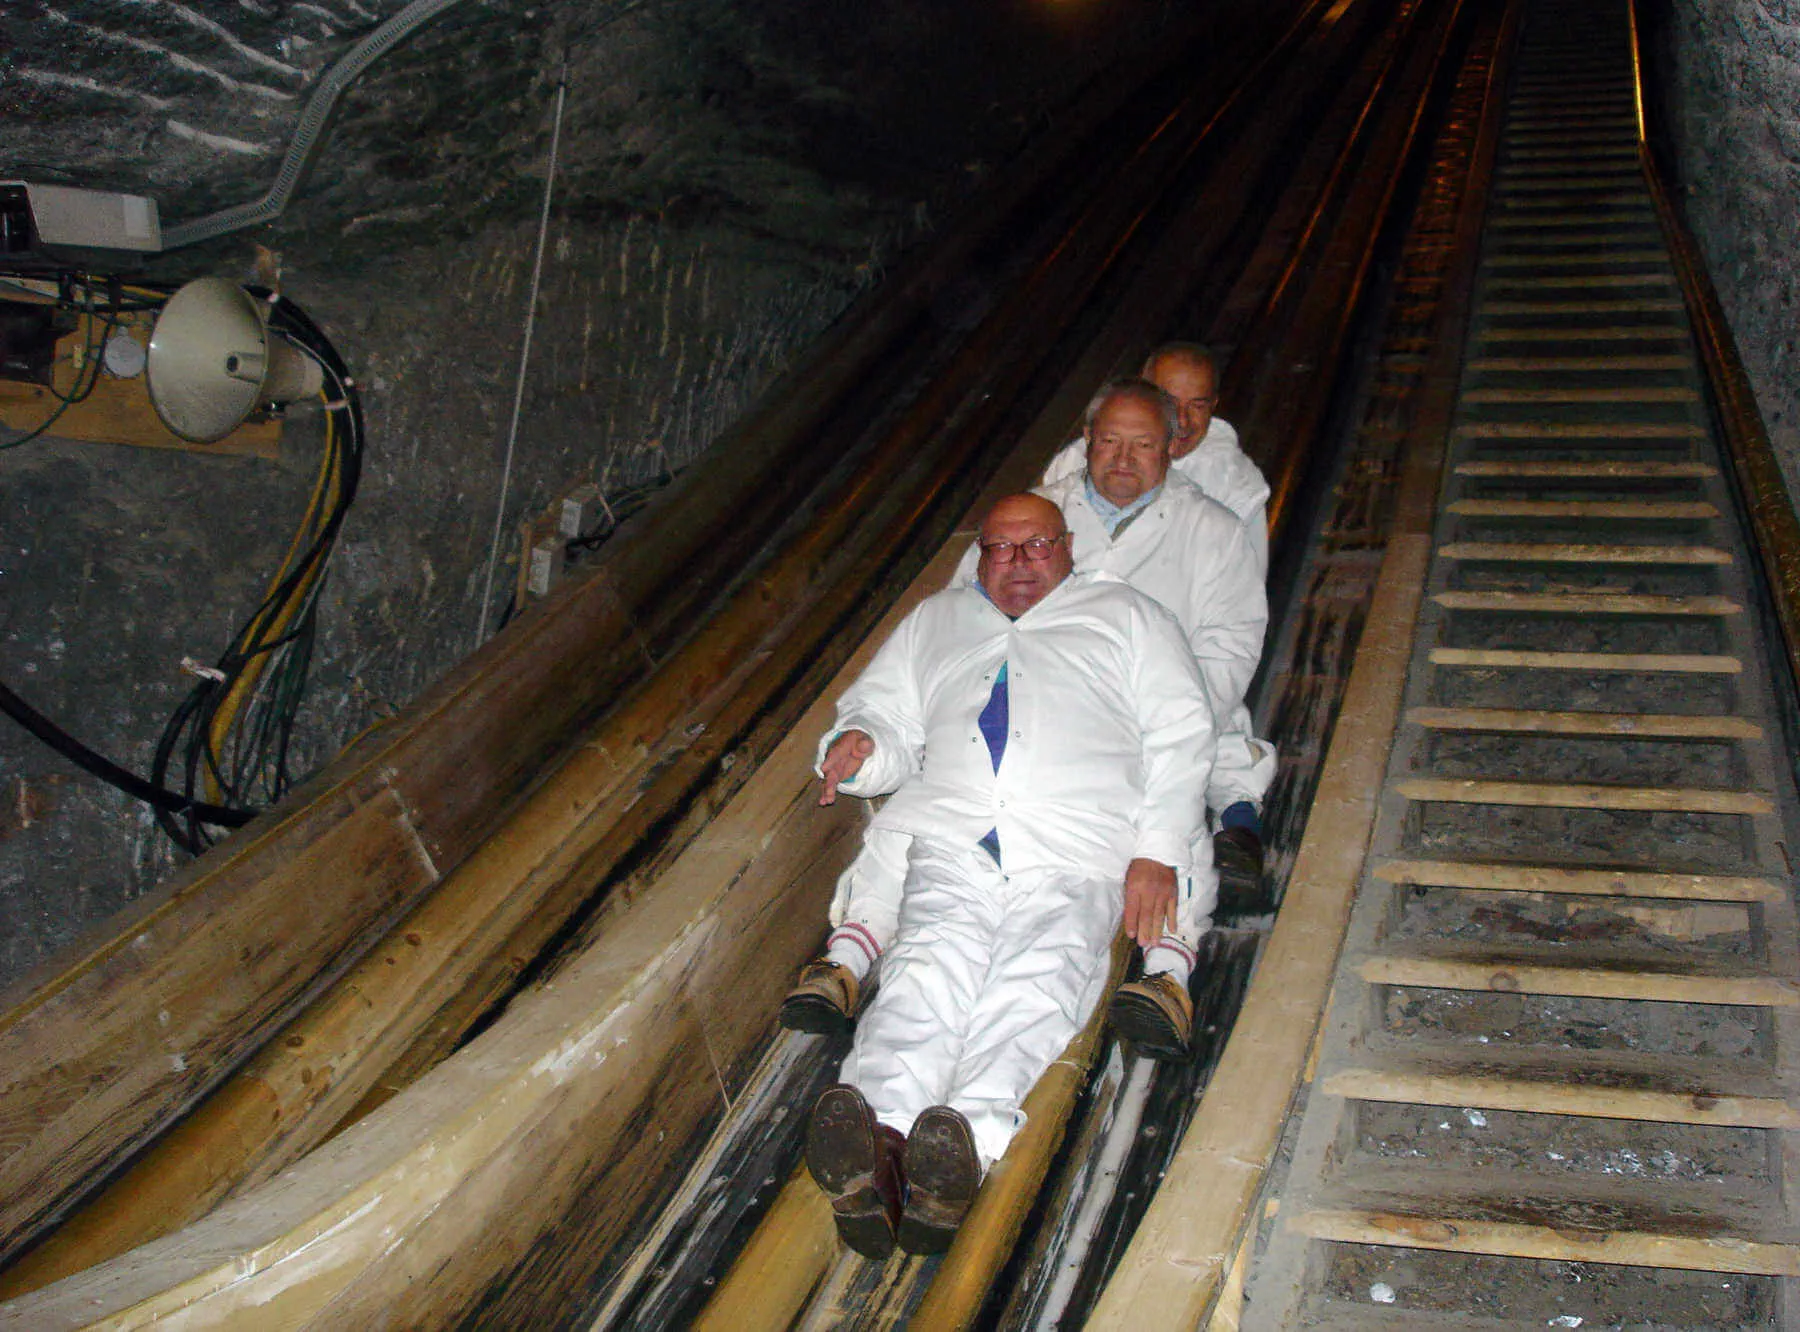 Visitors to Hallstatt’s salt mine slide down two banisters. At the end, they find out their time and receive an automatic souvenir photo